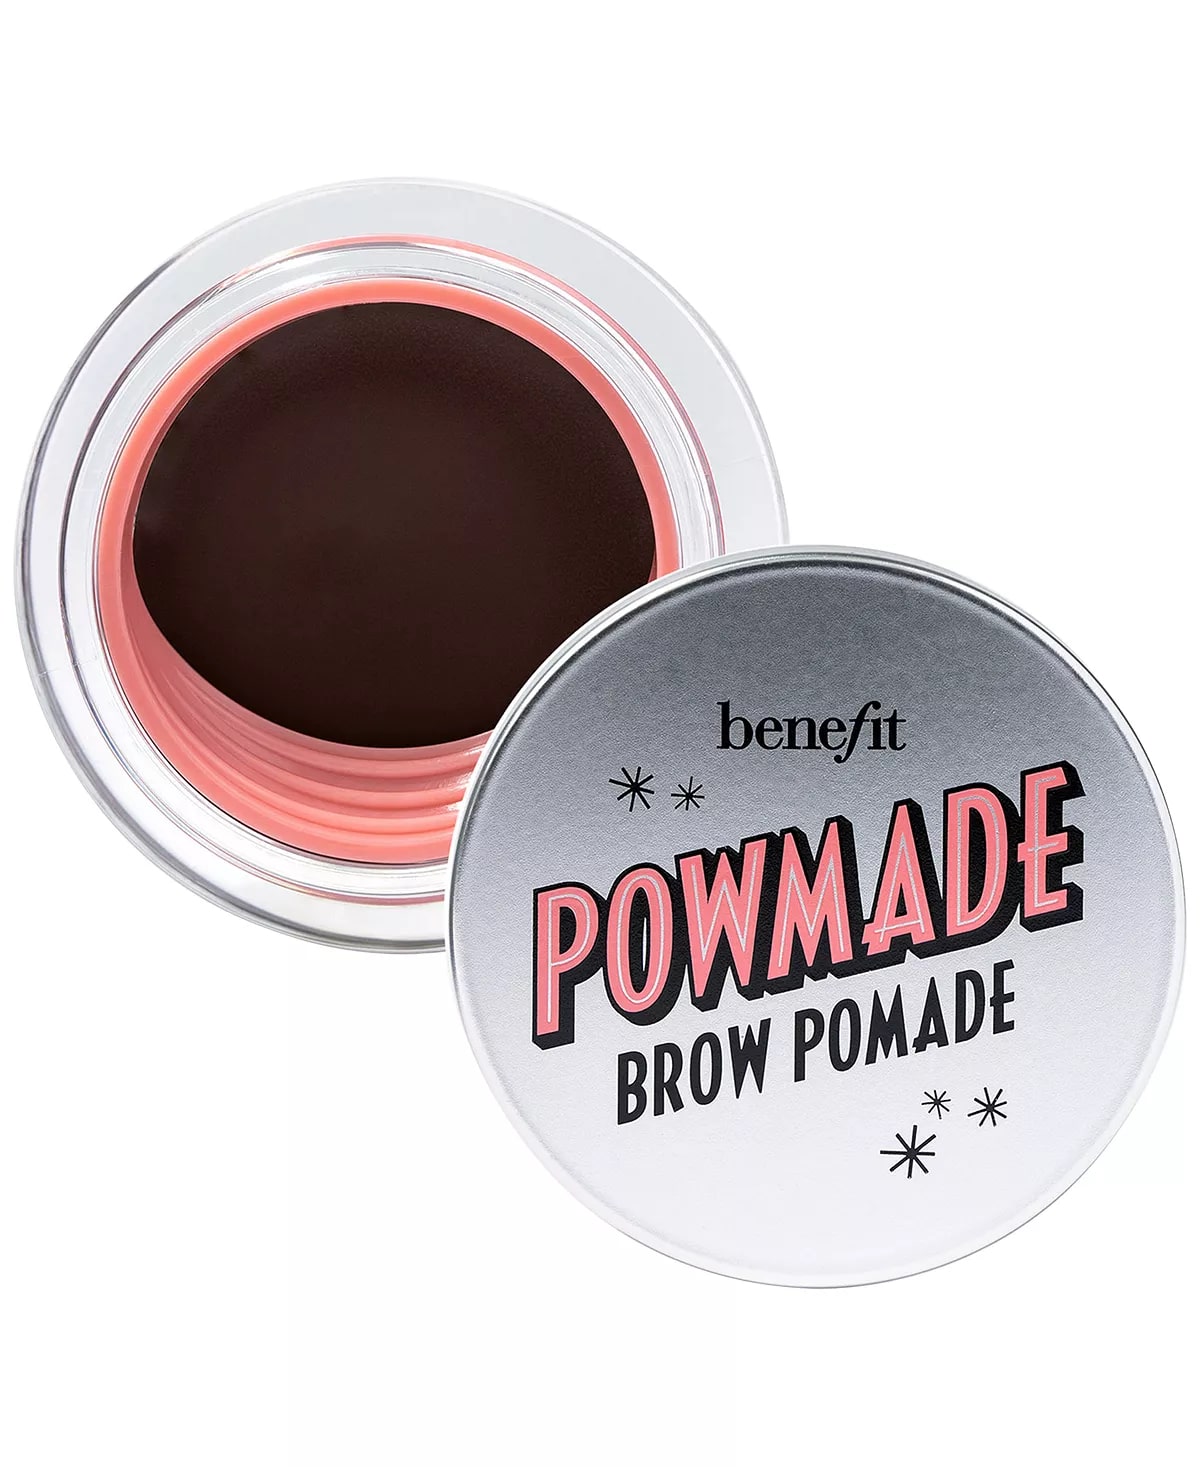 POWmade Brow Pomade by Benefit